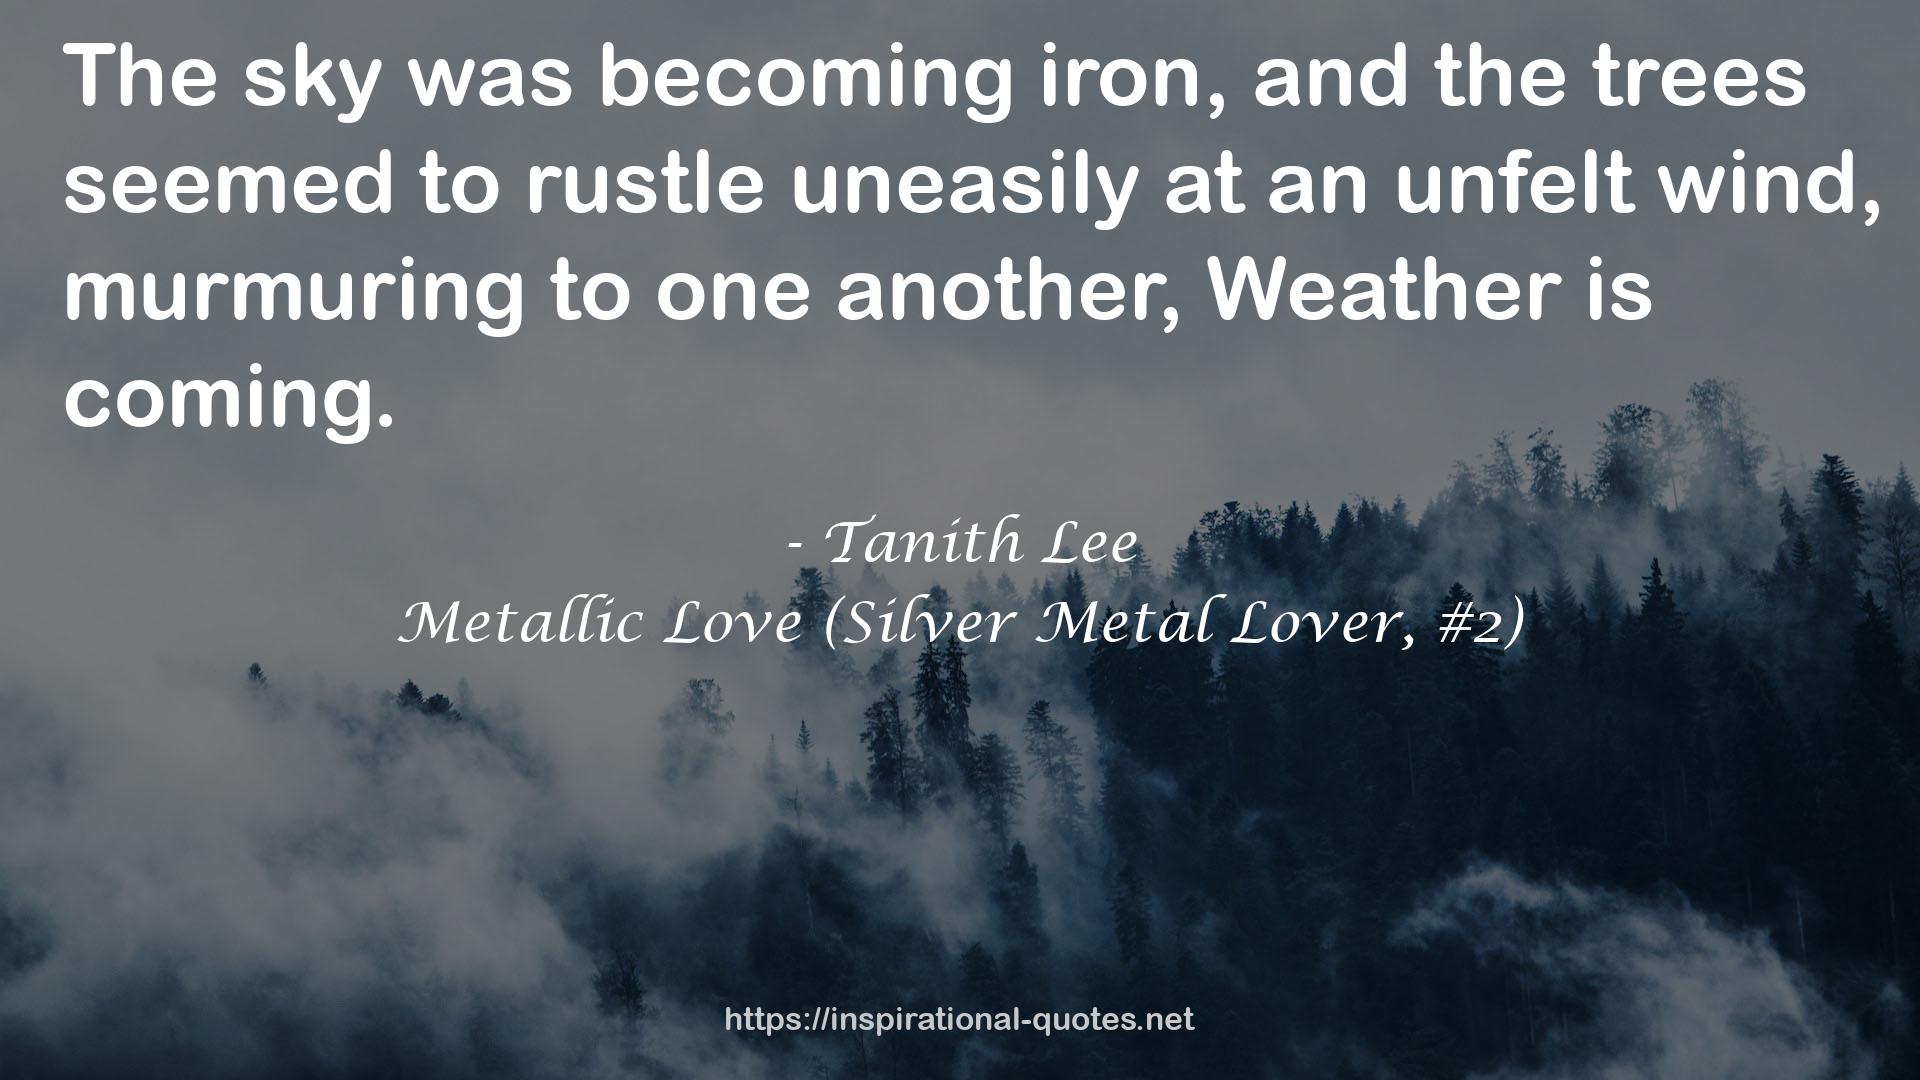 Metallic Love (Silver Metal Lover, #2) QUOTES